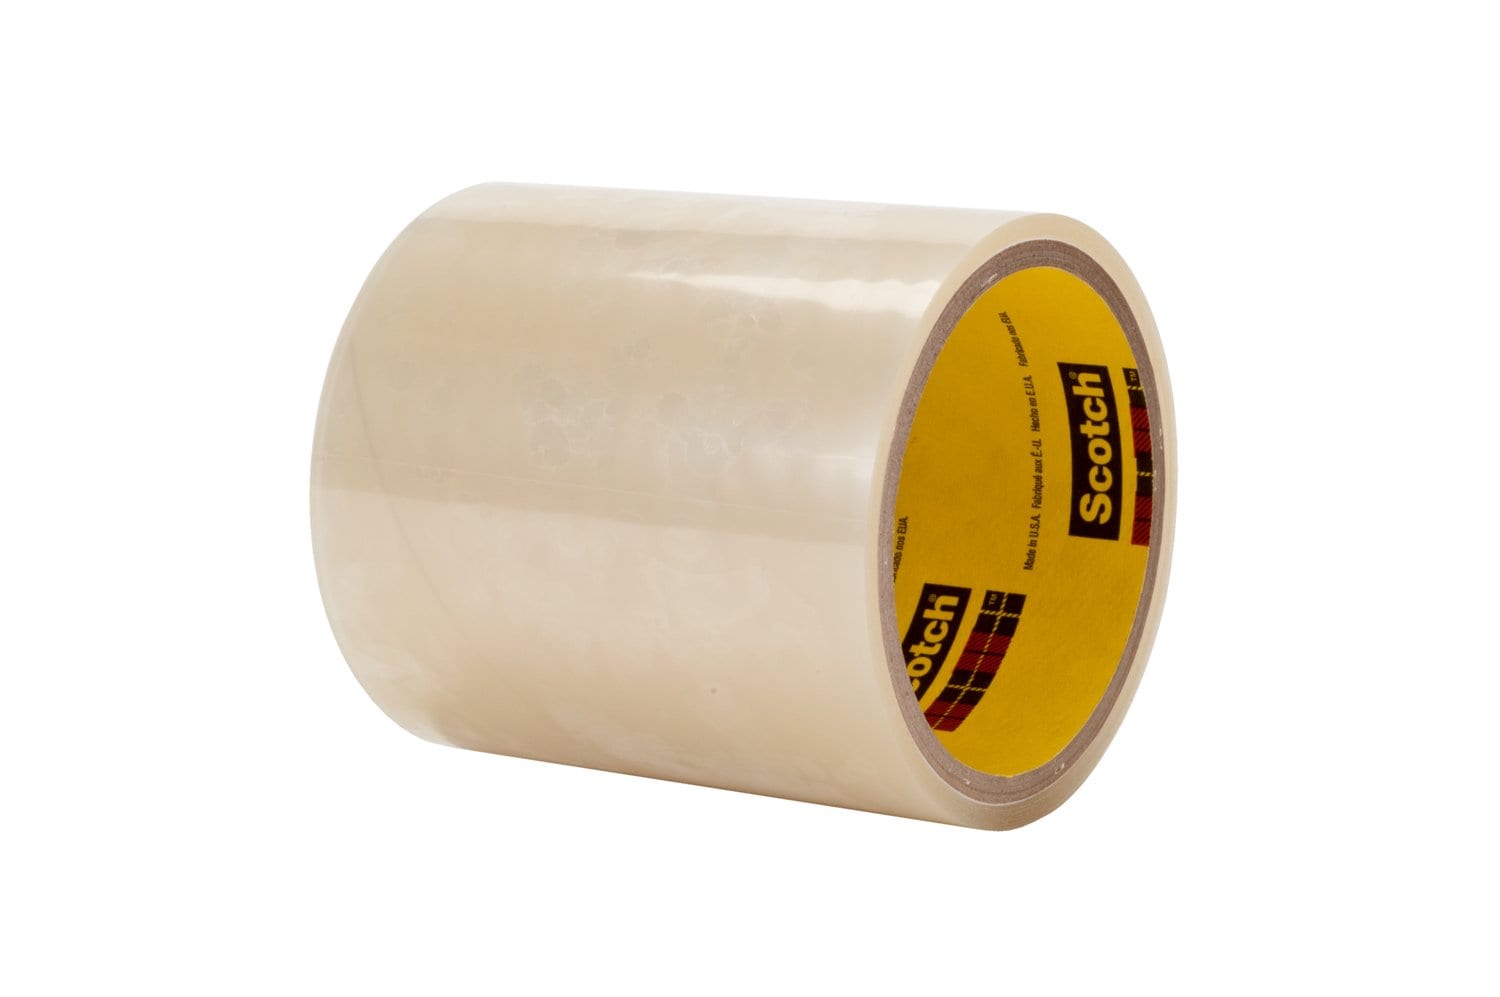 7000123375 - 3M Adhesive Transfer Tape 467MP, Clear, 24 in x 180 yd, 2 mil, 1 roll
per case